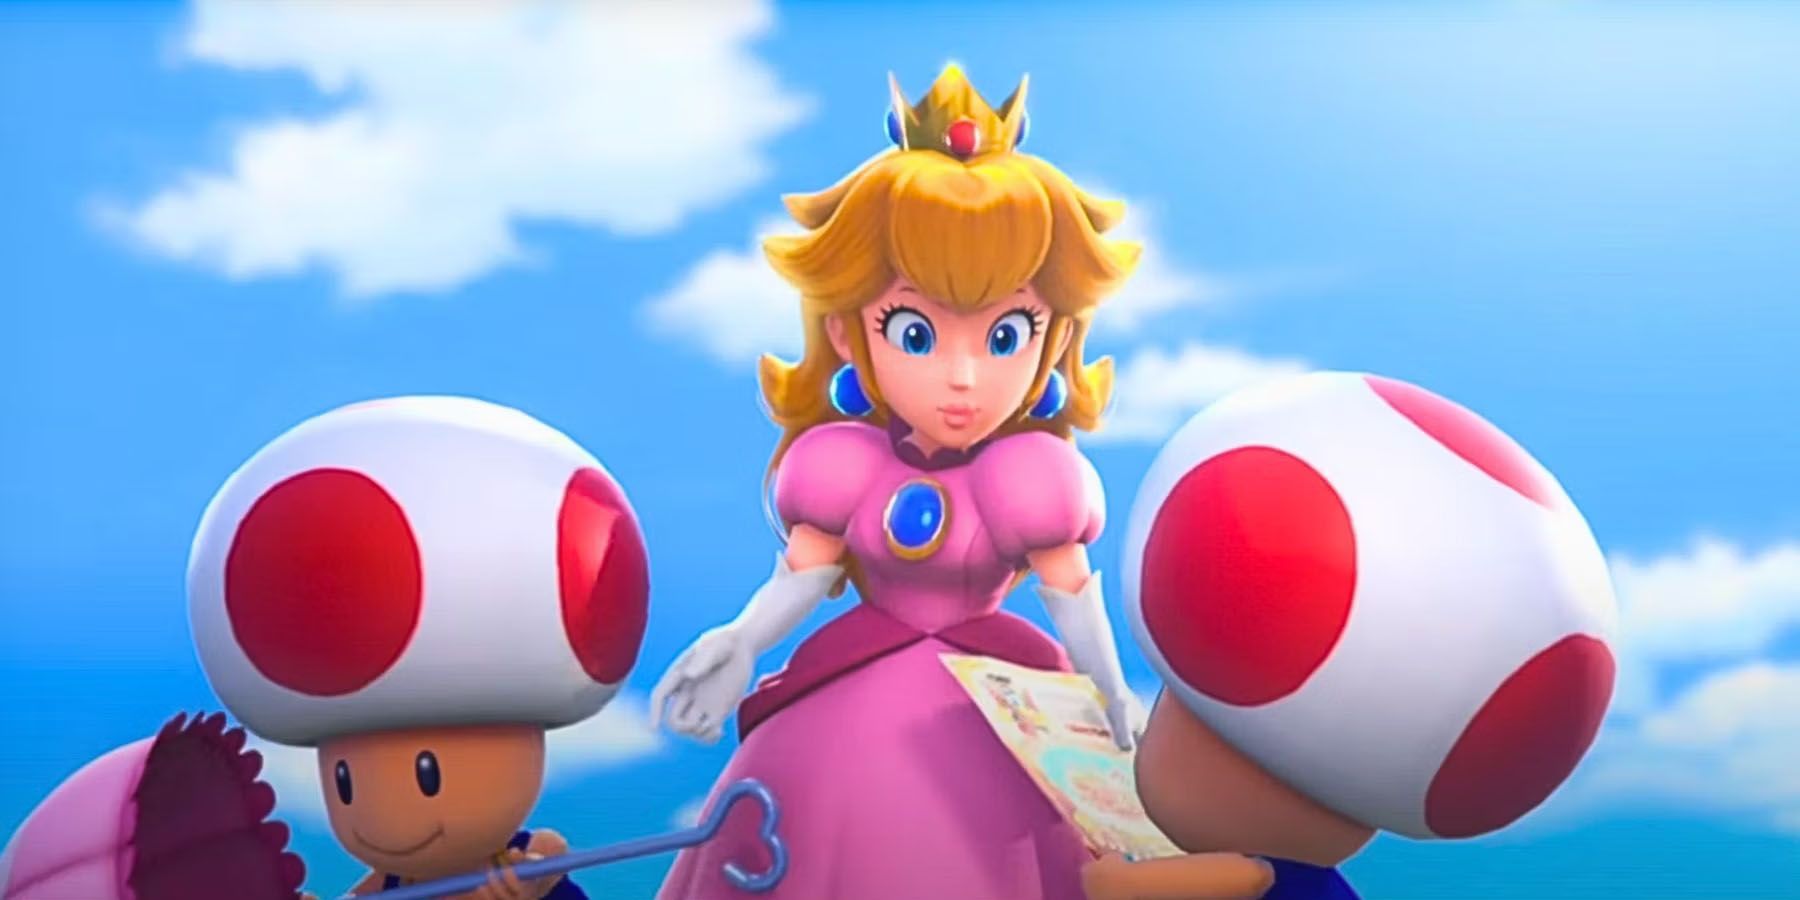 A screenshot of Princess Peach and two Toads in Princess Peach: Showtime.